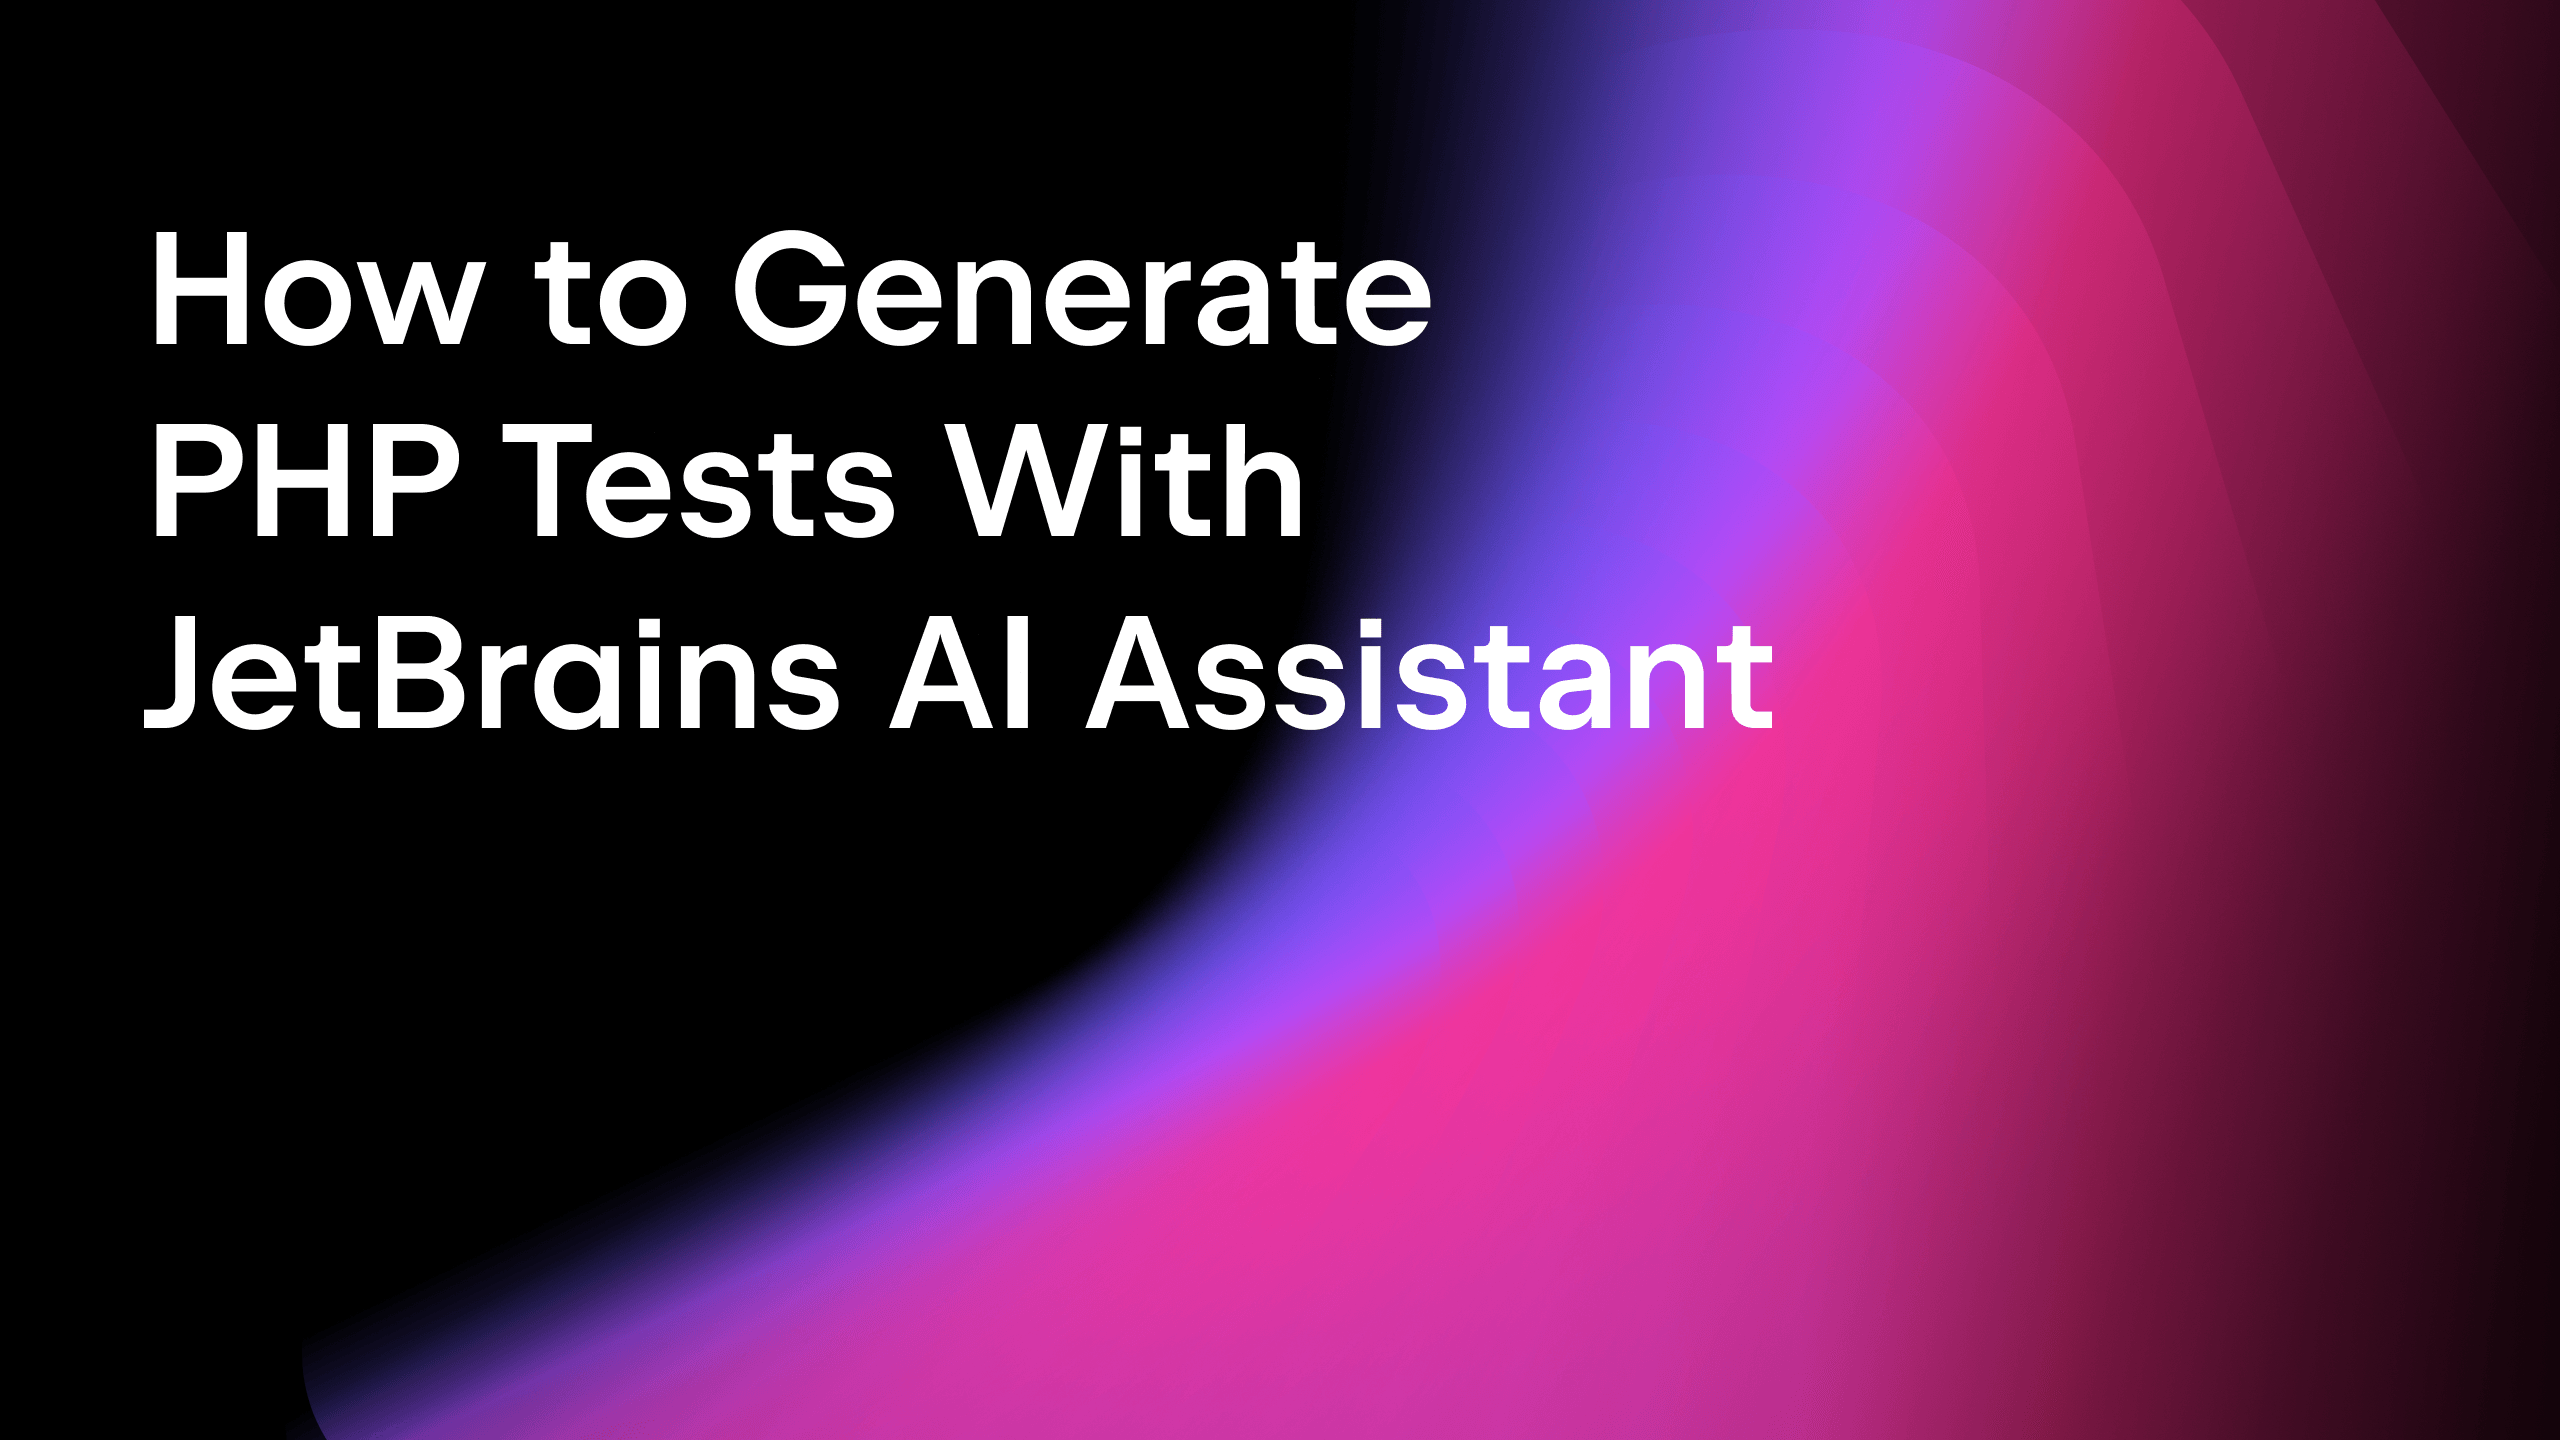 How to Generate PHP Tests With JetBrains AI Assistant